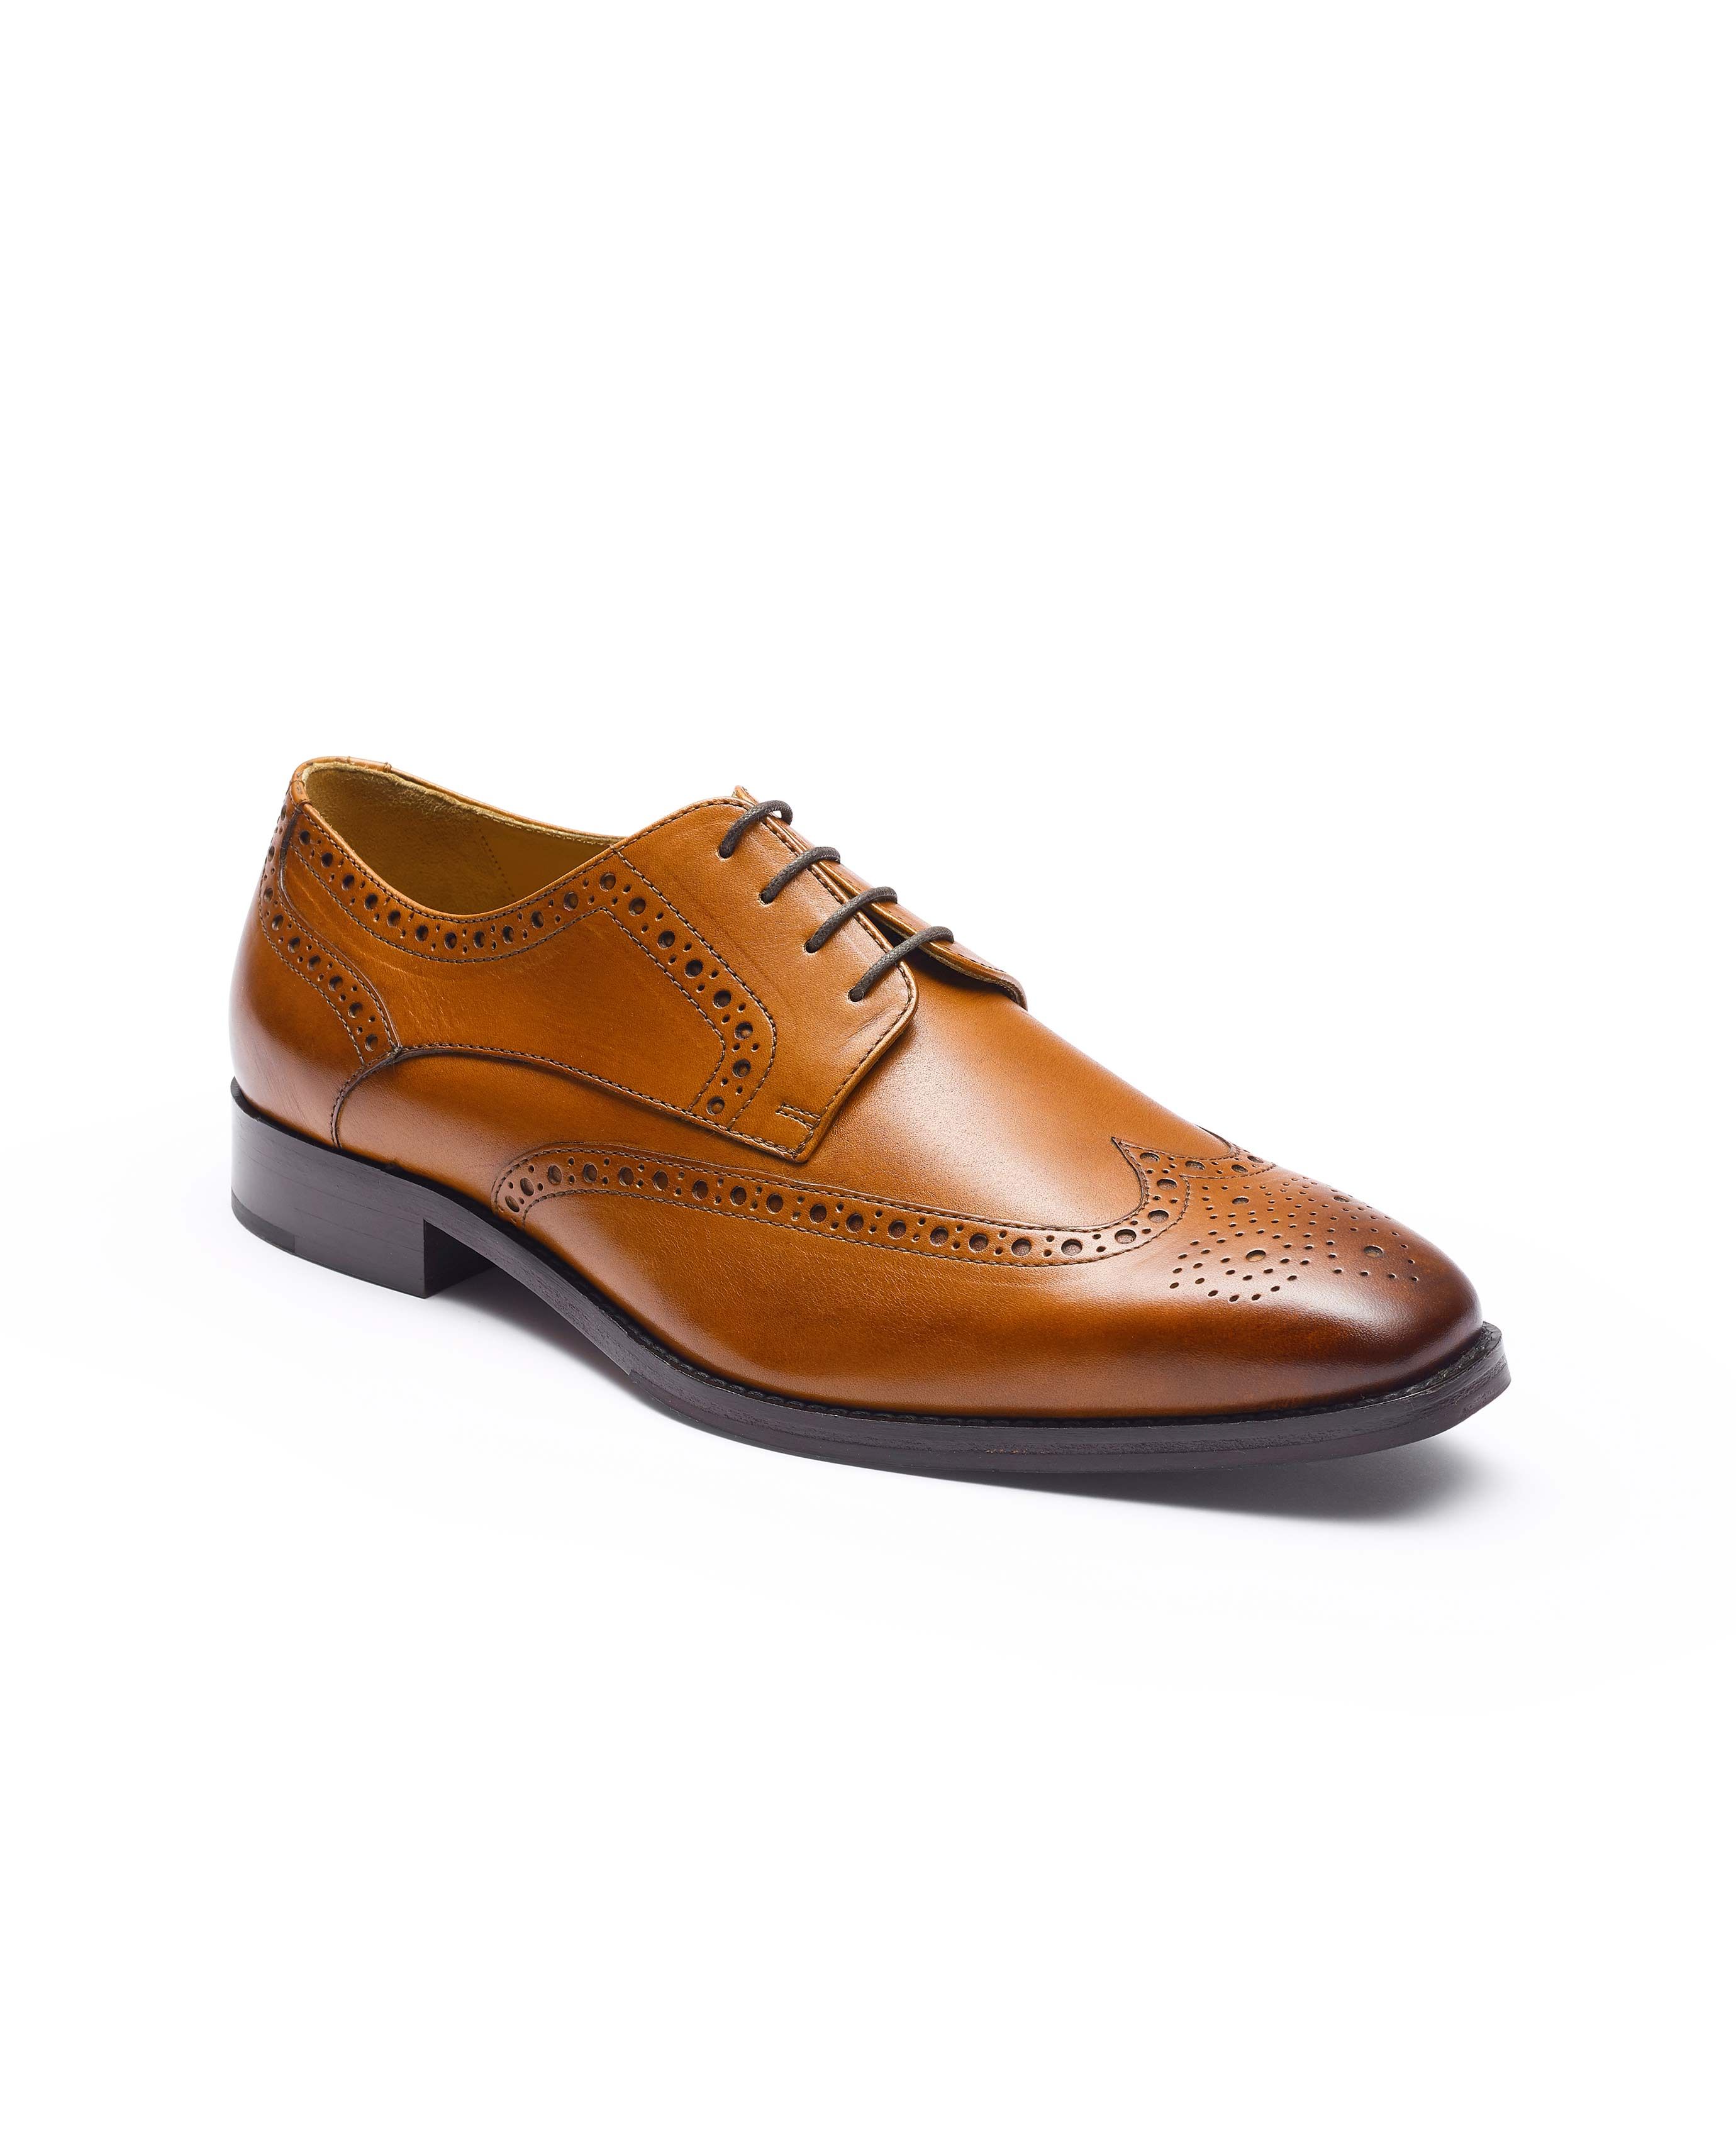 Men's Tan Hand-Painted Leather Derby Brogues | Savile Row Co